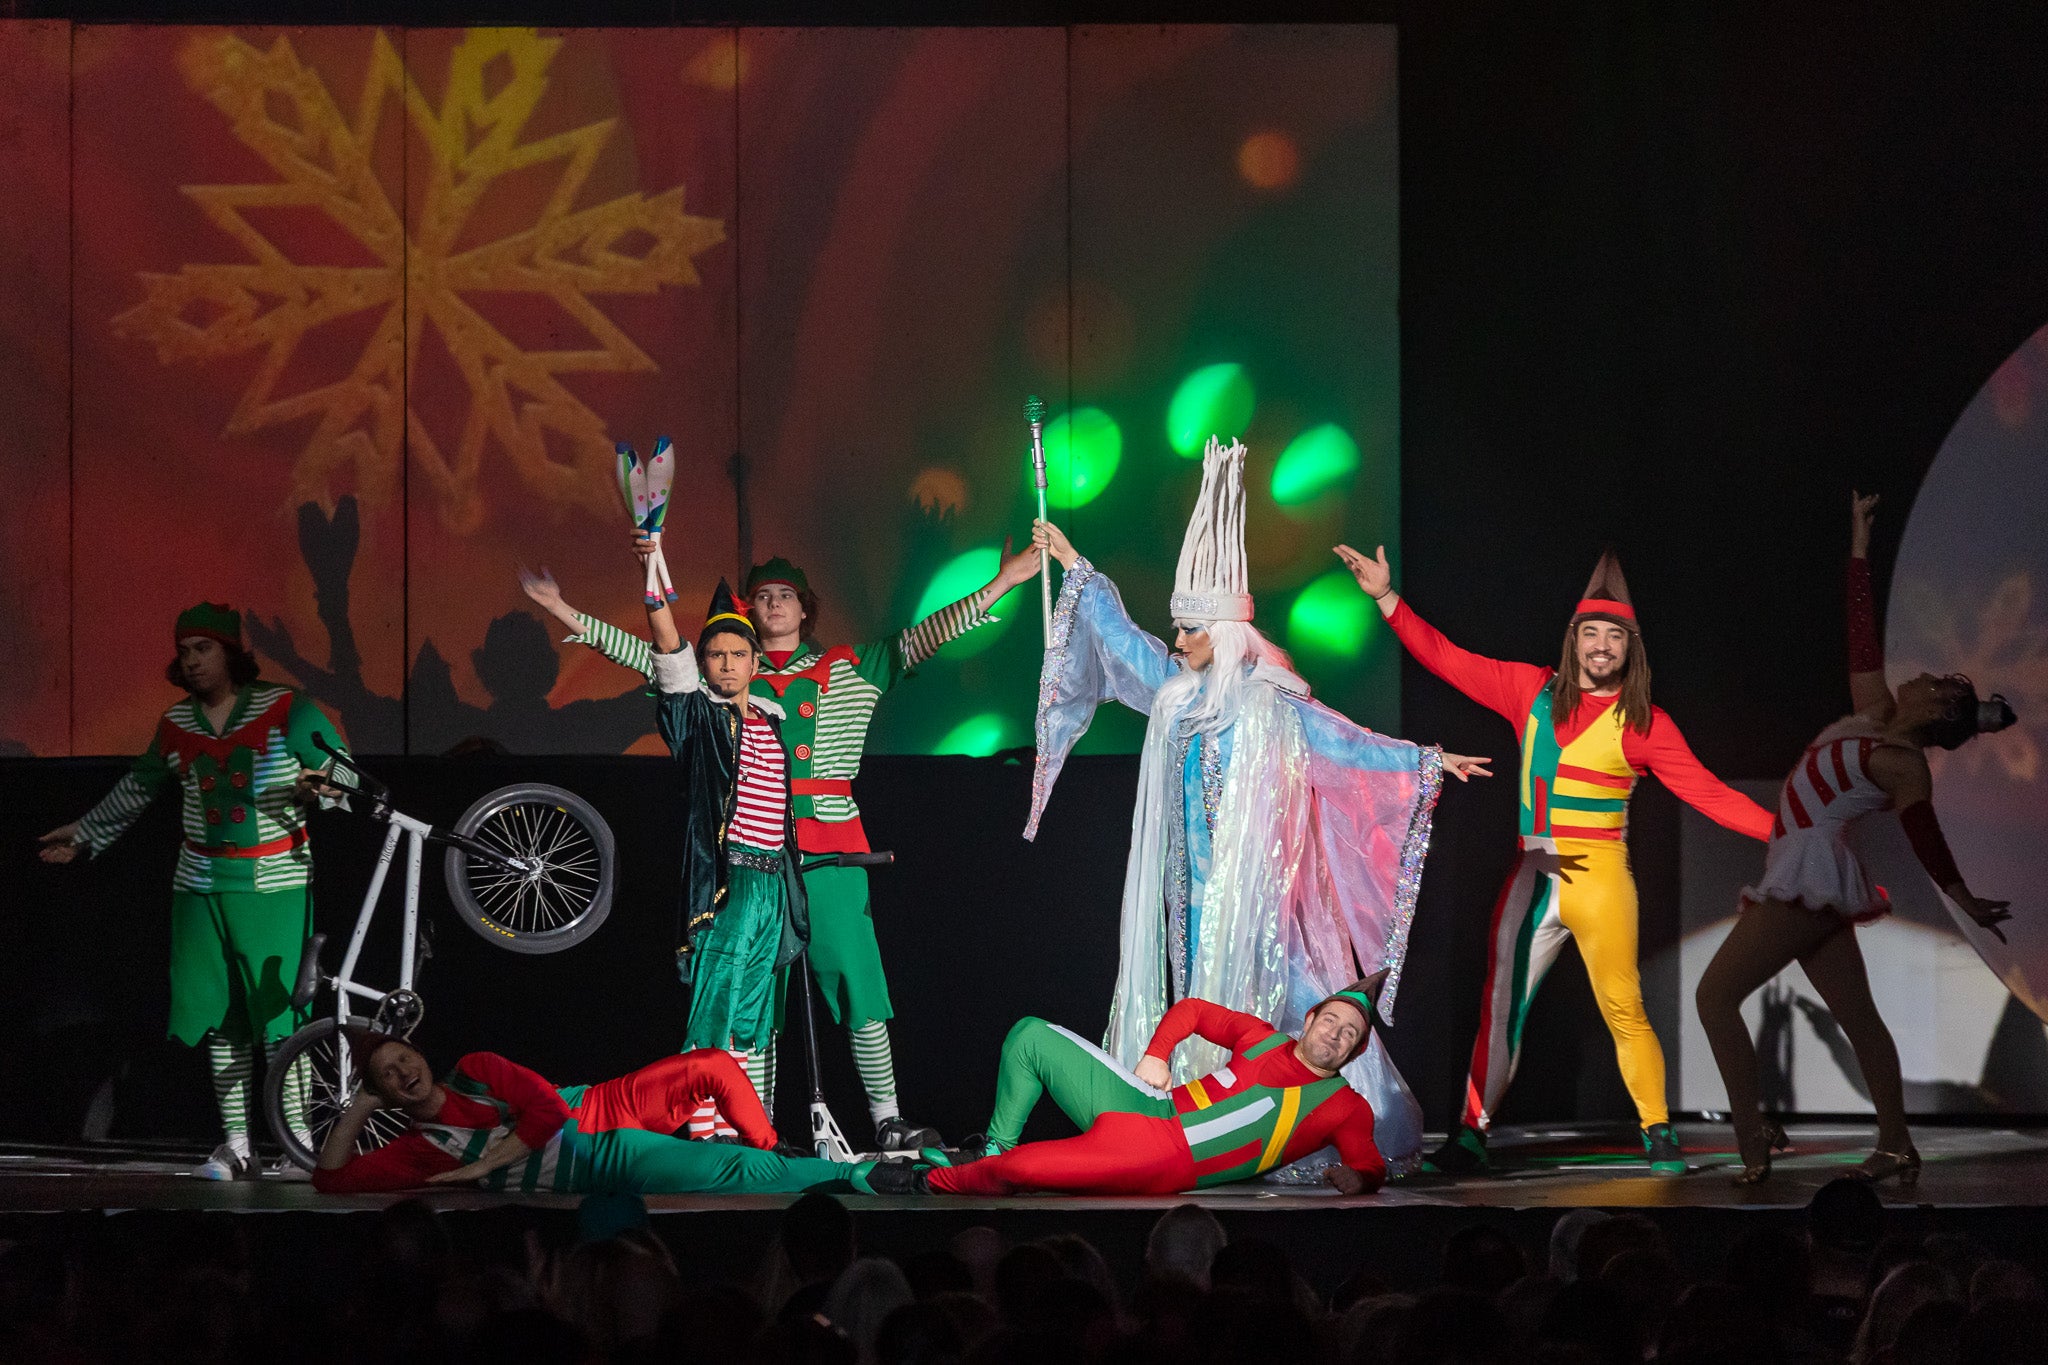 Holiday Dreams, A Spectacular Holiday Cirque Performers